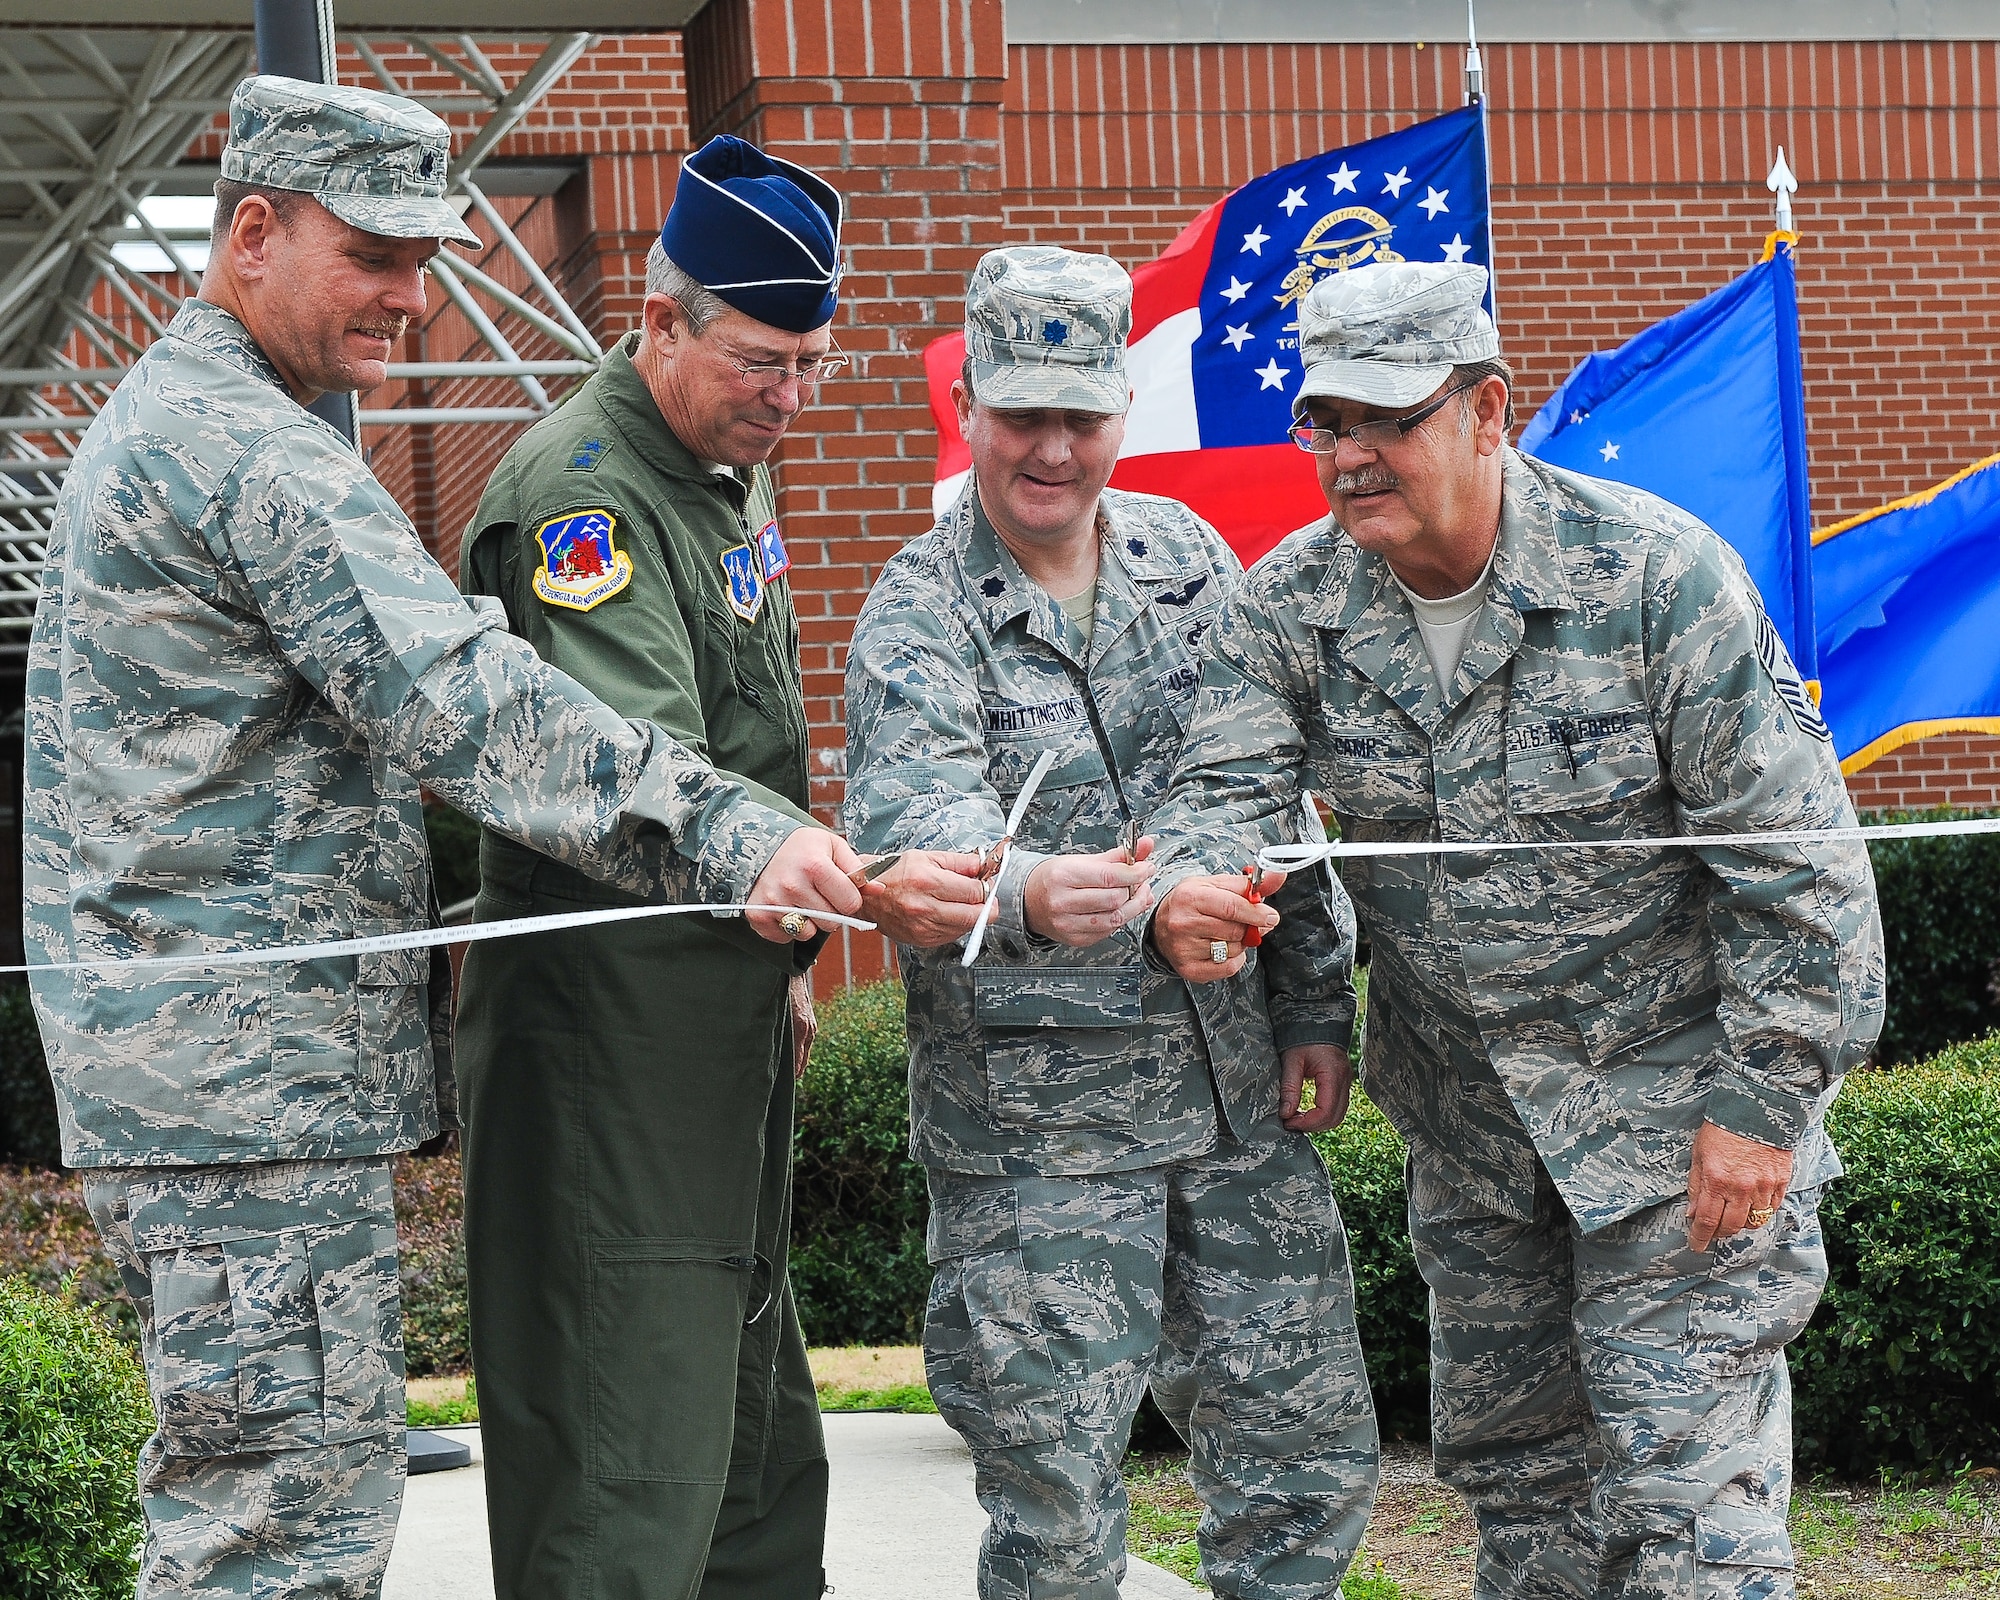 Lt. Col. Fred Walker, 202nd Engineering Installation Squadron (EIS) commander, left, Maj. Gen. Thomas Moore, Georgia Air National Guard commander, Lt. Col. John Whittington, 116th Civil Engineering Squadron, and Command Chief Master Sgt. Donald Camp, Georgia Air National Guard command chief, cut the ribbon during a ceremony to celebrate the new home for the 202nd EIS, Robins Air Force Base, Ga., Jan. 21, 2012.   The 202nd EIS had been stationed at the Macon, Ga., airport since the unit was formed in 1952.   They began the move to their new location in building 2078 at Robins Air Force Base in Sept. 2012.  (Air National Guard photo by Master Sgt. Roger Parsons/Released)